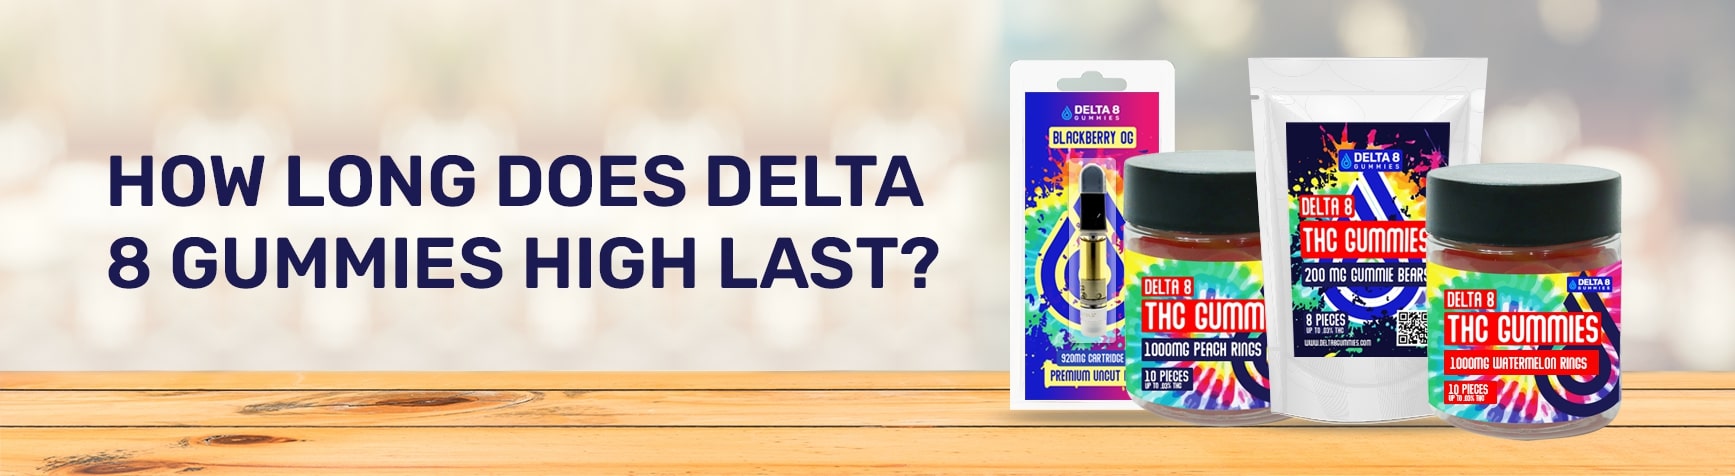 How Long Does Delta 8 High Last?